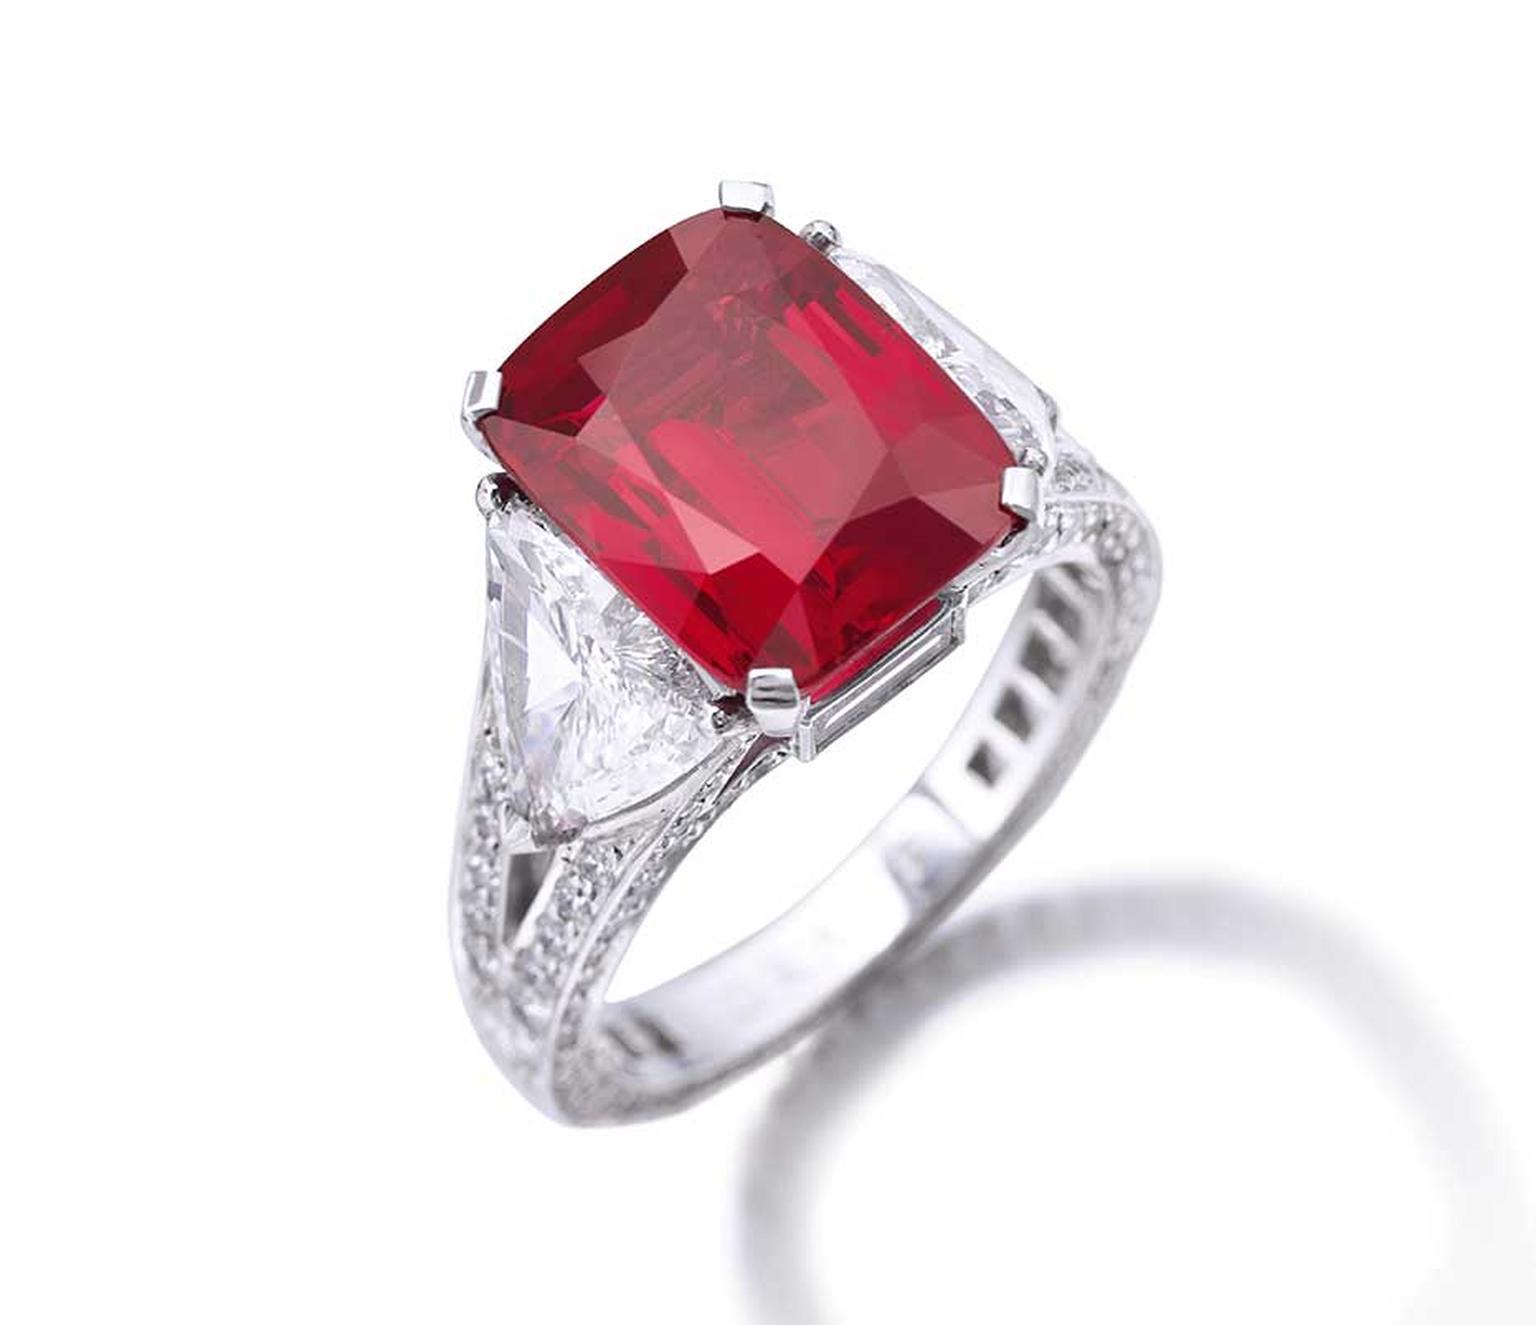 A rare Graff ruby ring featuring a cushion-cut 8.62ct Burmese ruby in a “pigeon’s blood” shade of red (estimate: US$6.8-9 million) leads the sale of Dimitri Mavrommatis' private collection of jewels at Sotheby's Geneva on 12 November 2014.